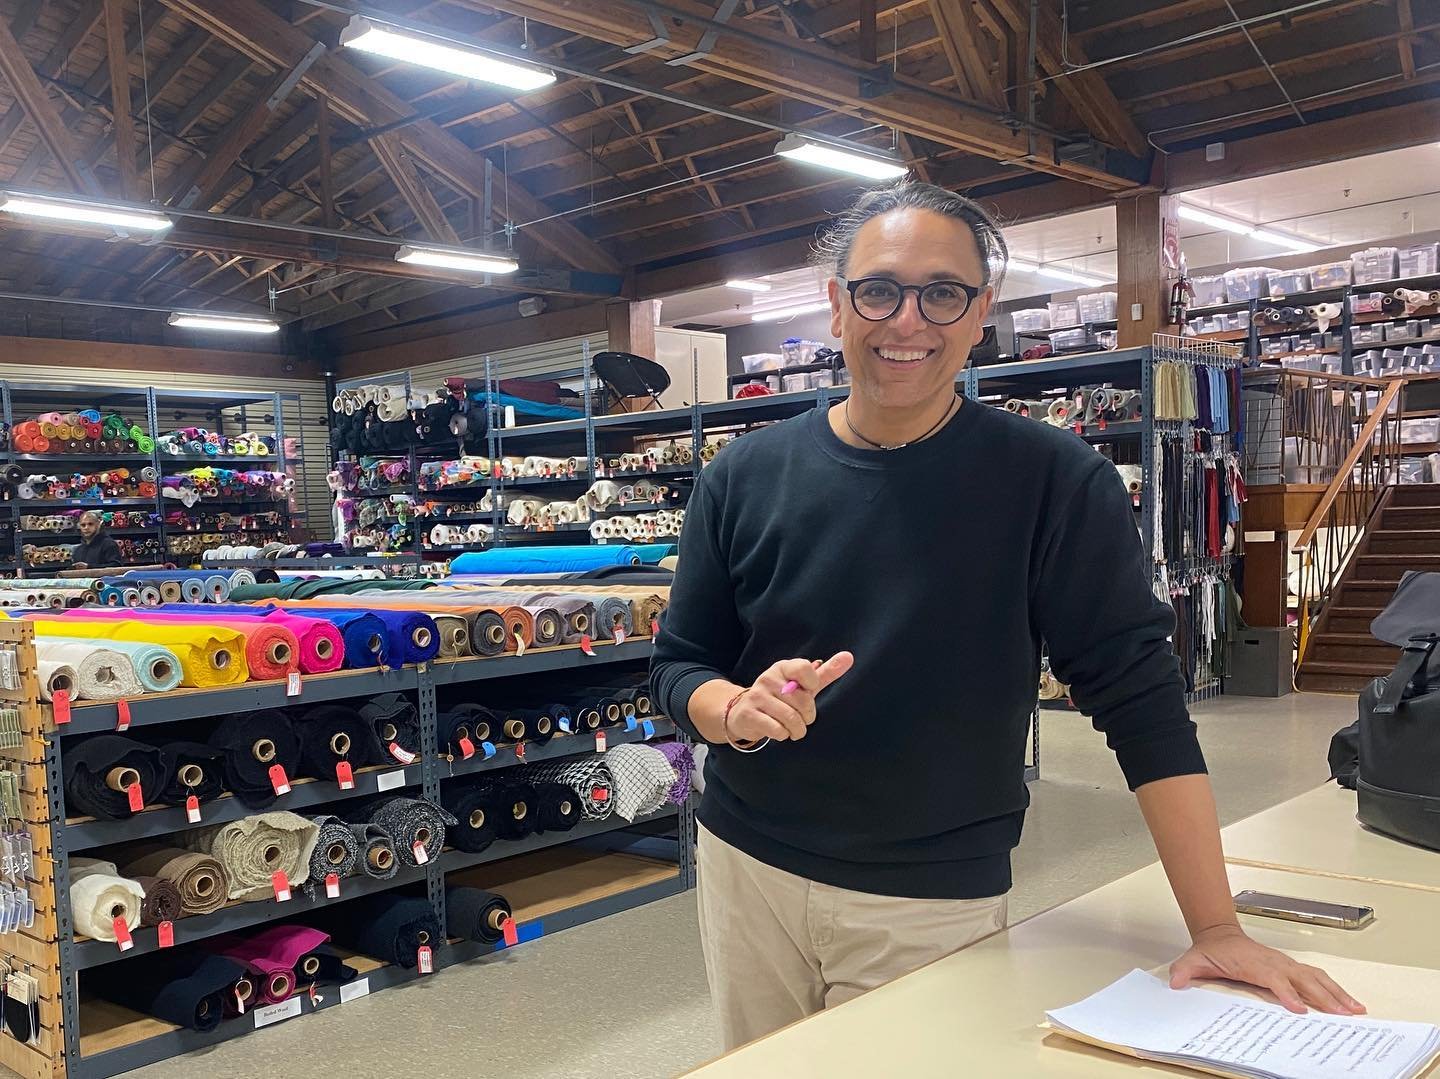 Fabric sourcing at one of our favorite Chicago fabric stores @fishmansfabrics - Fashion Design student Kanwar is developing their first collection, so we needed to go shopping! We are so excited to see their gorgeous looks come to life 😍
#chicagofas